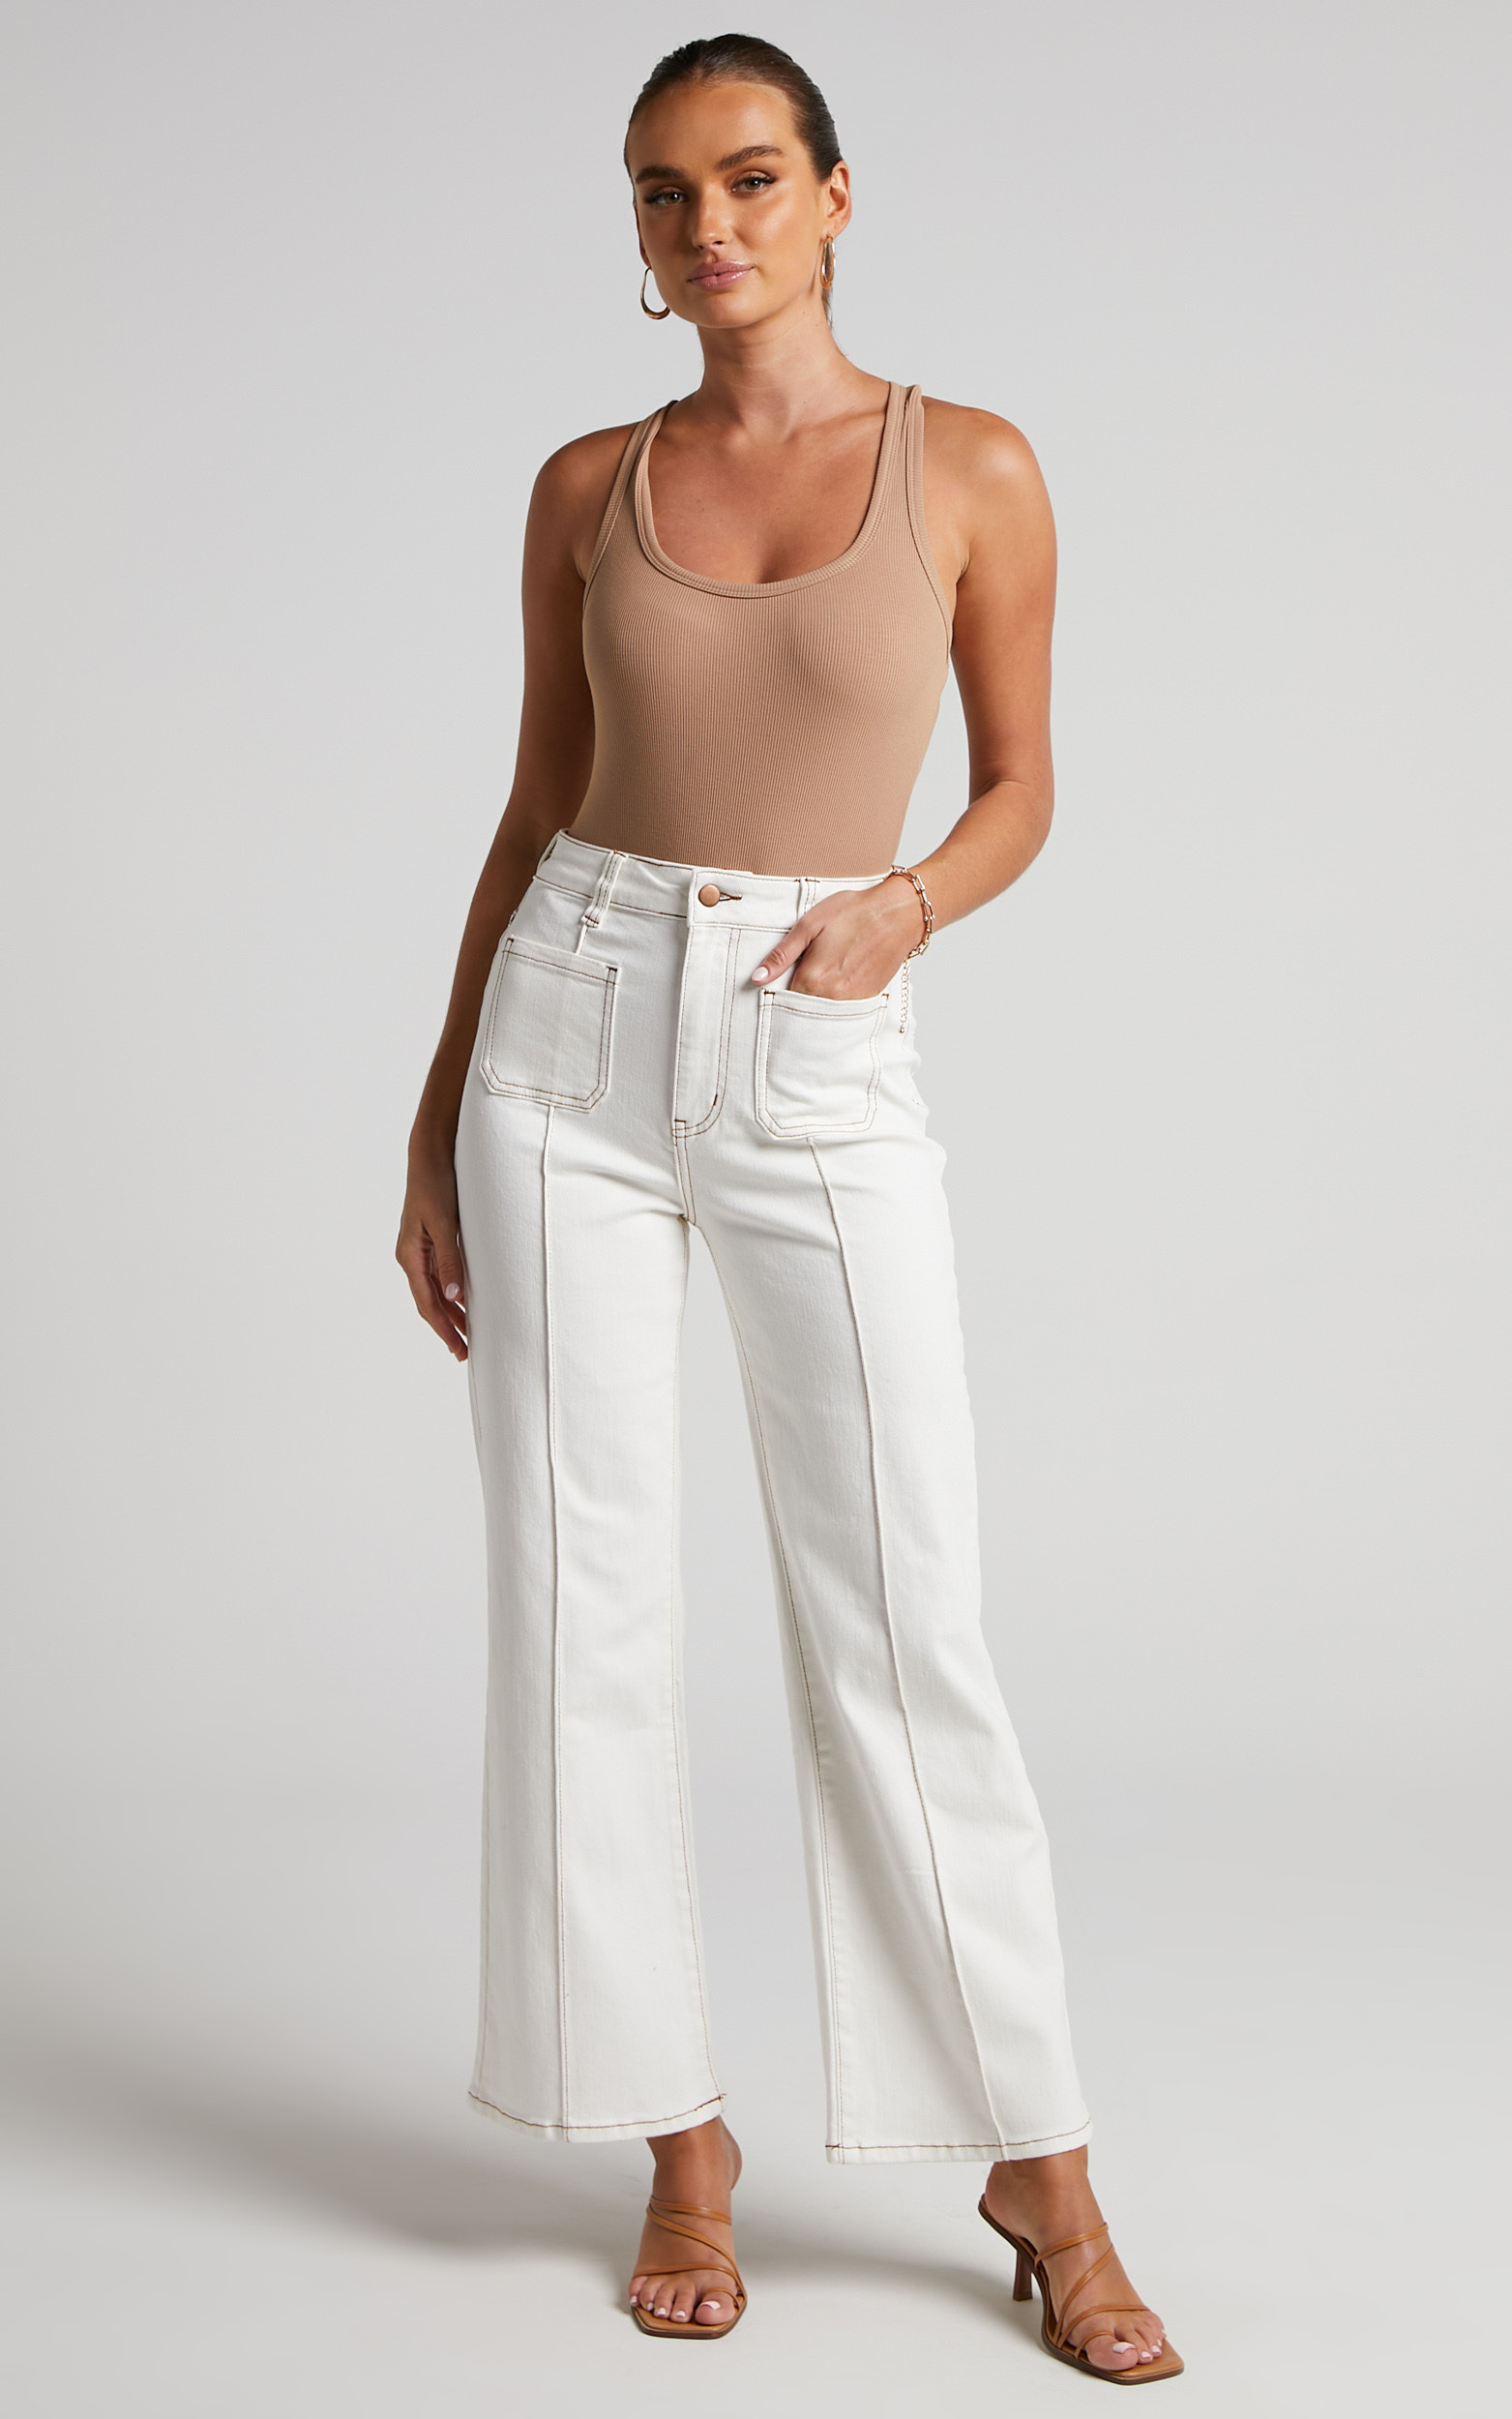 Malcolm Jeans - High Rise Contrast Stitch Flared Jeans in White Denim - 04, WHT1, hi-res image number null